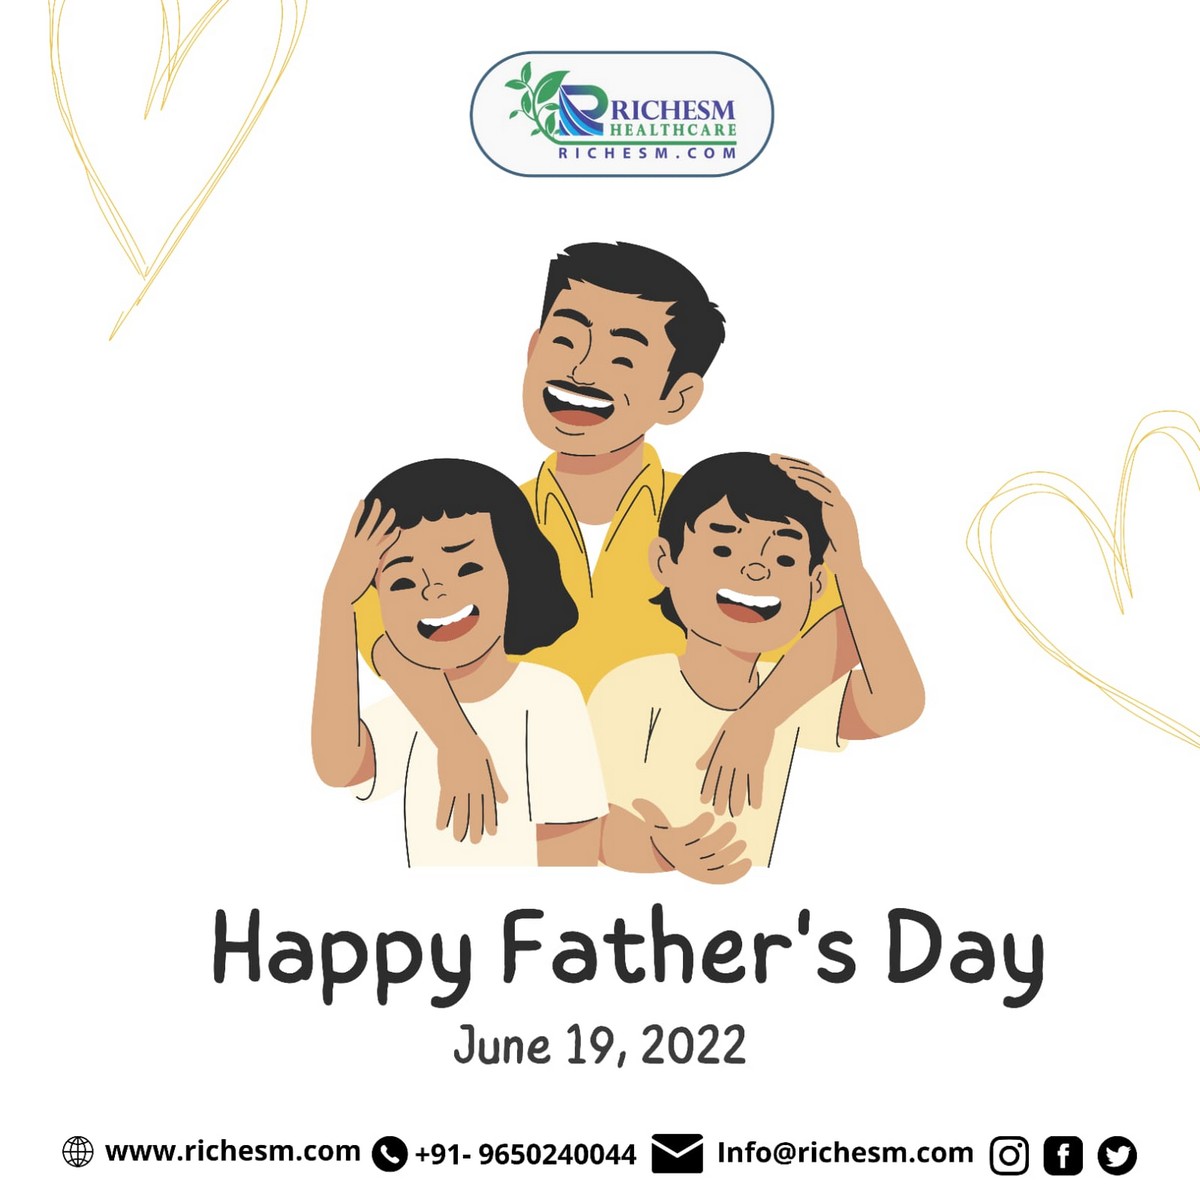 A Very Happy Fathers Day Wishes To All Of You From RichesM Others A Very Happy Fathers Day Wishes To All Of You From RichesM